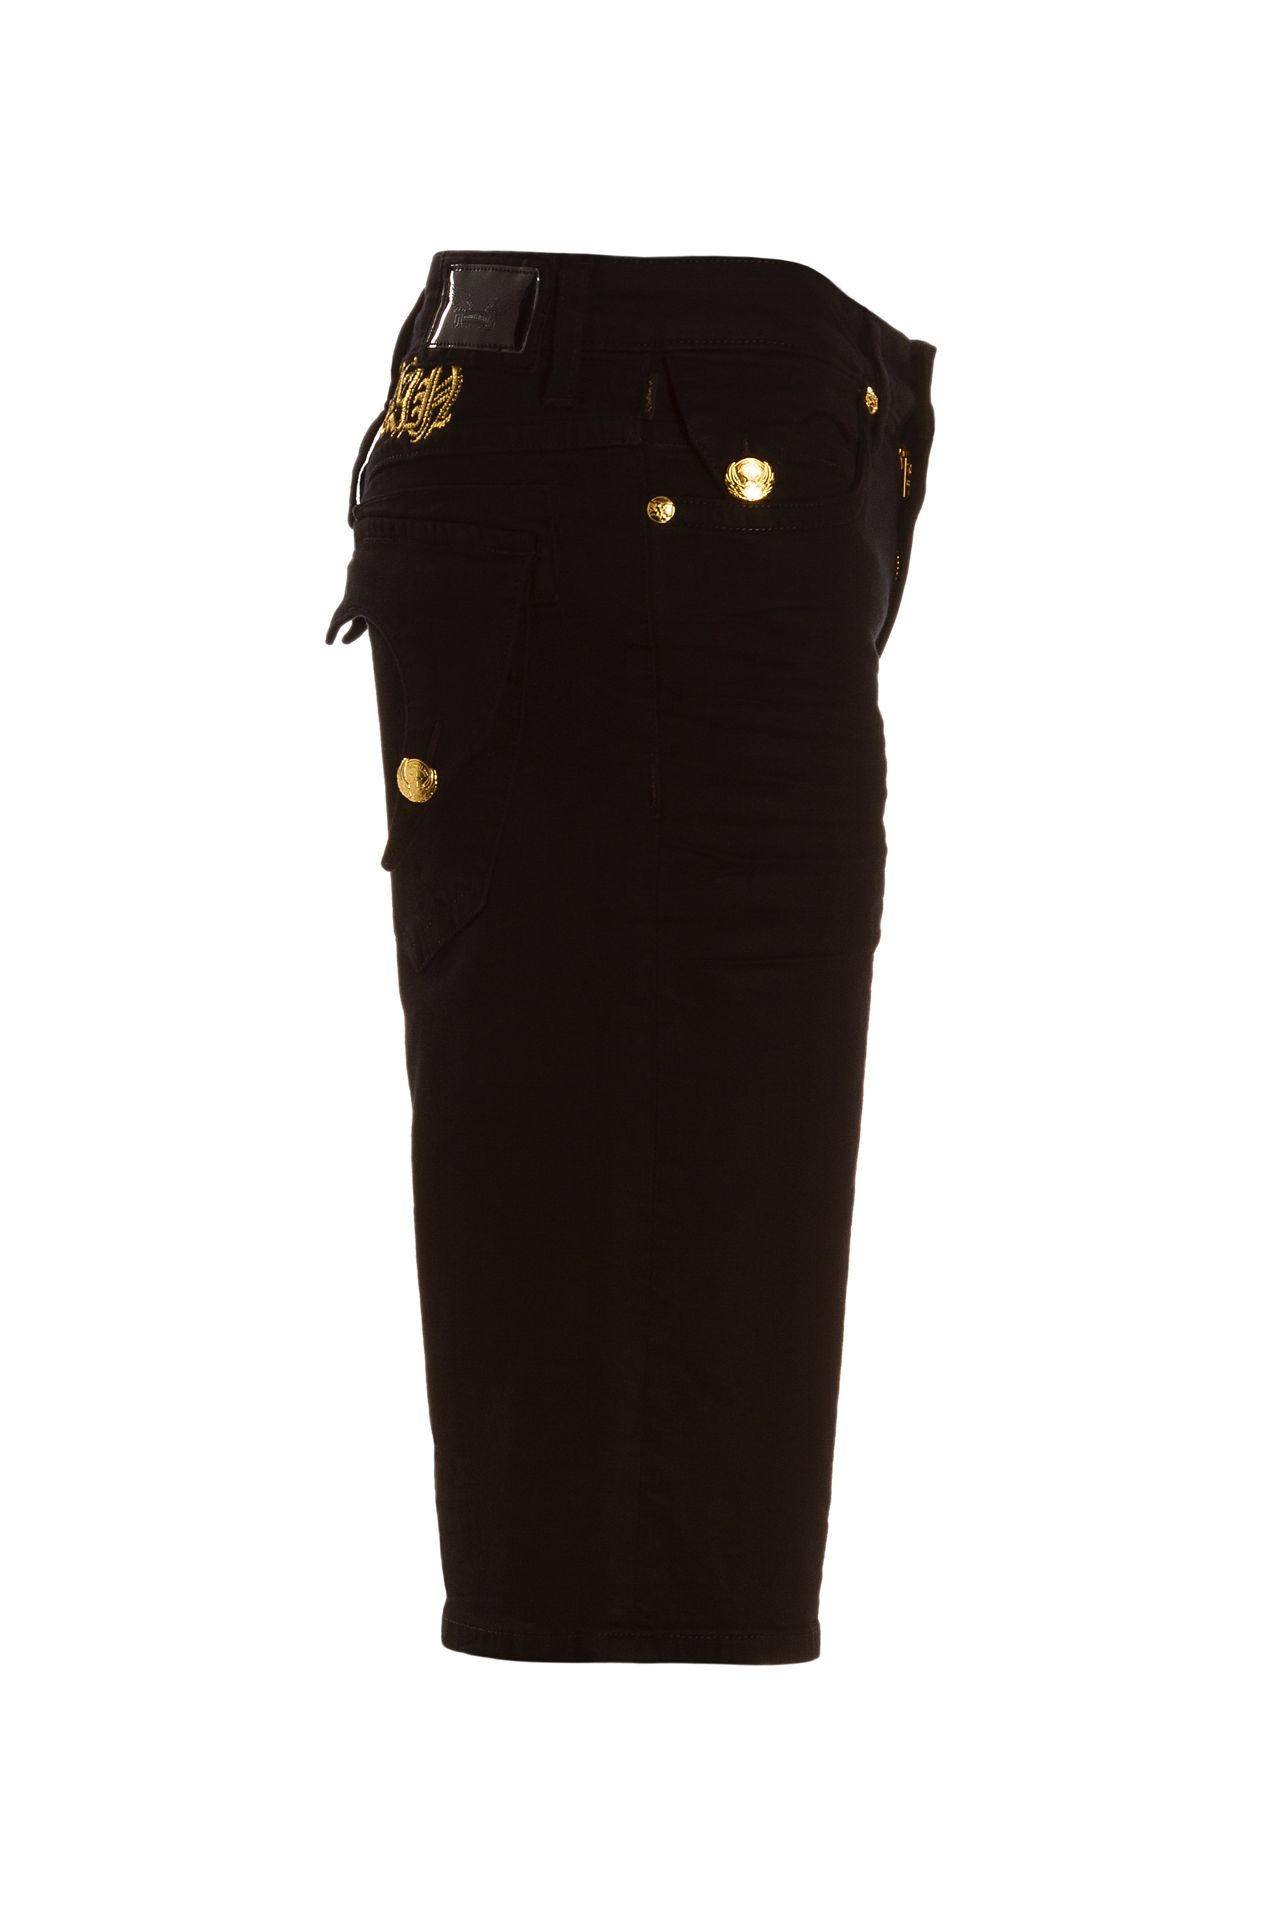 KILLER FLAP SHORTS IN BLACK AND GOLD